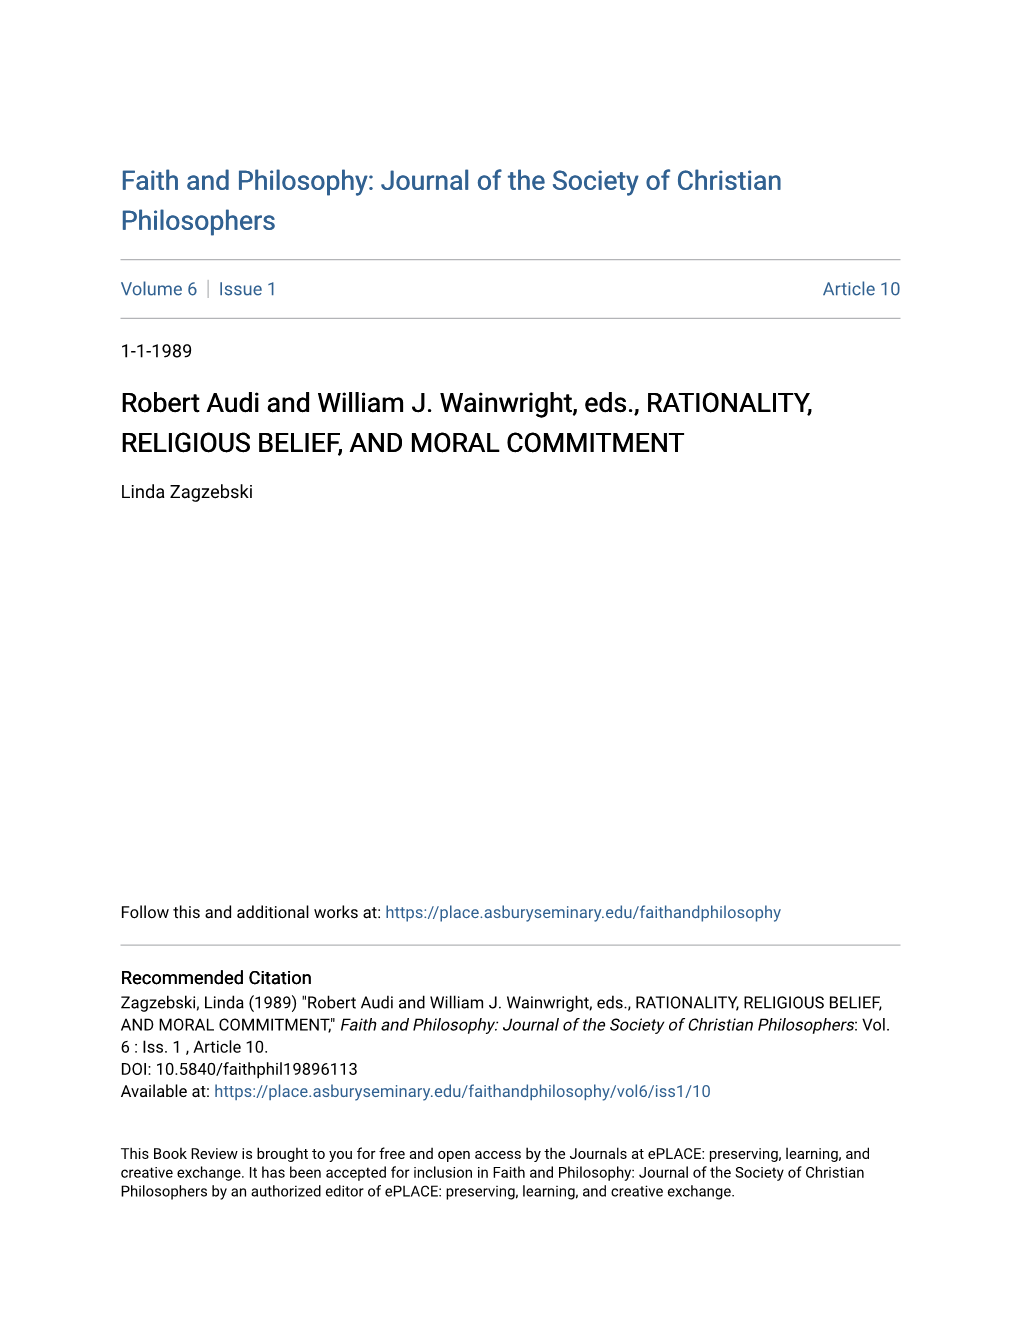 Robert Audi and William J. Wainwright, Eds., RATIONALITY, RELIGIOUS BELIEF, and MORAL COMMITMENT